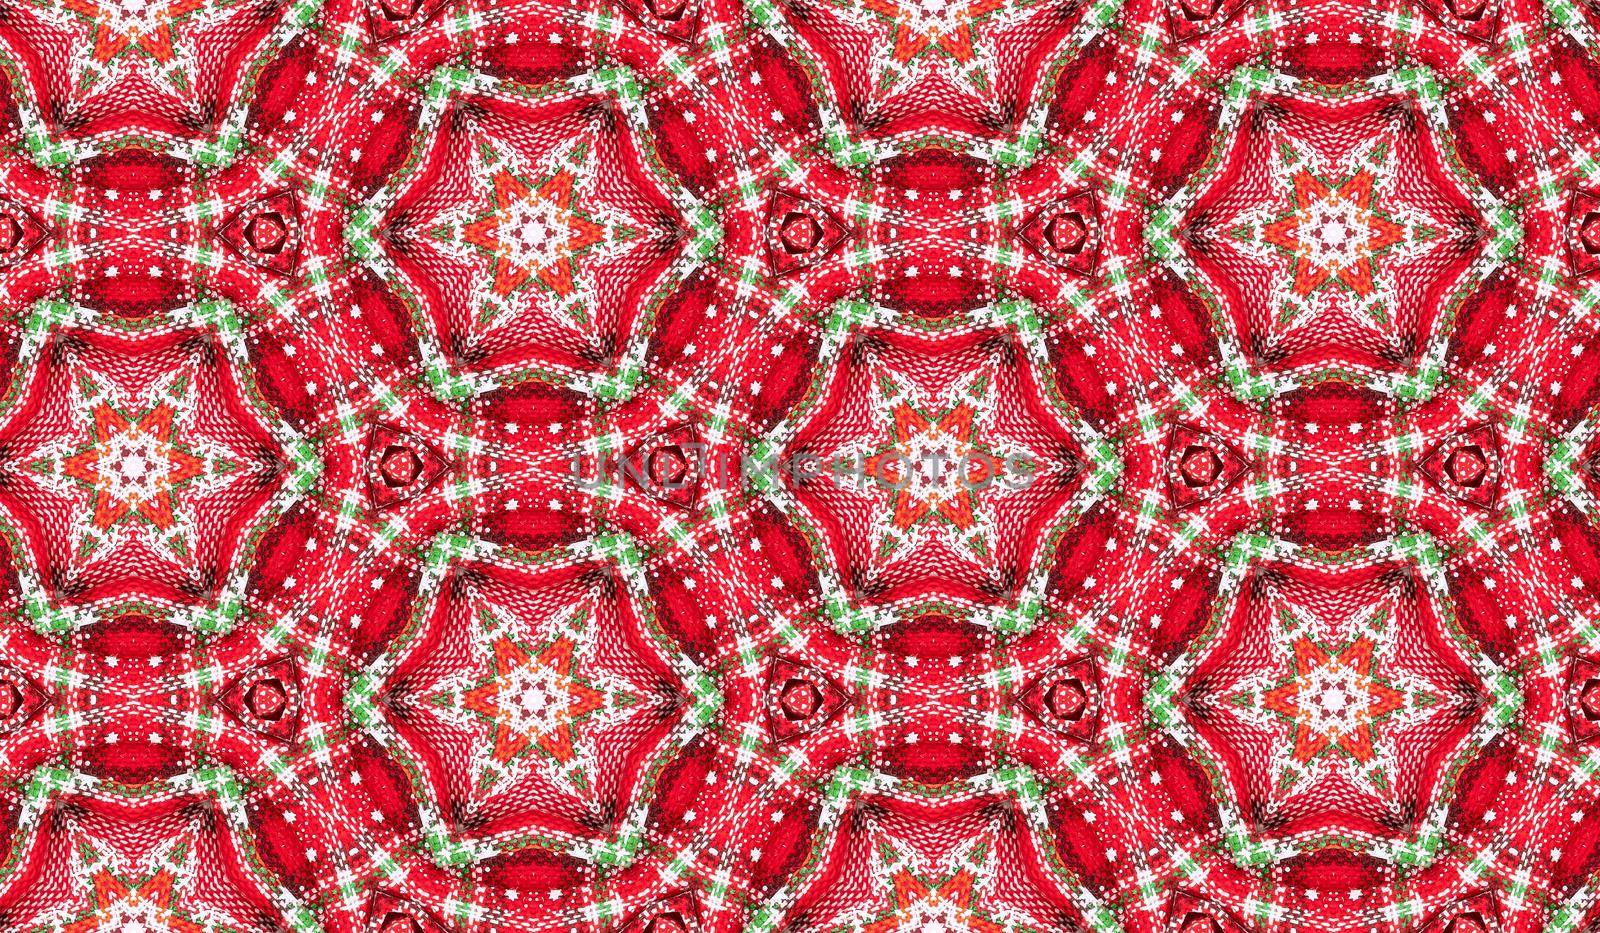 Abstract seamless texture from a photo of red green textile by galsand